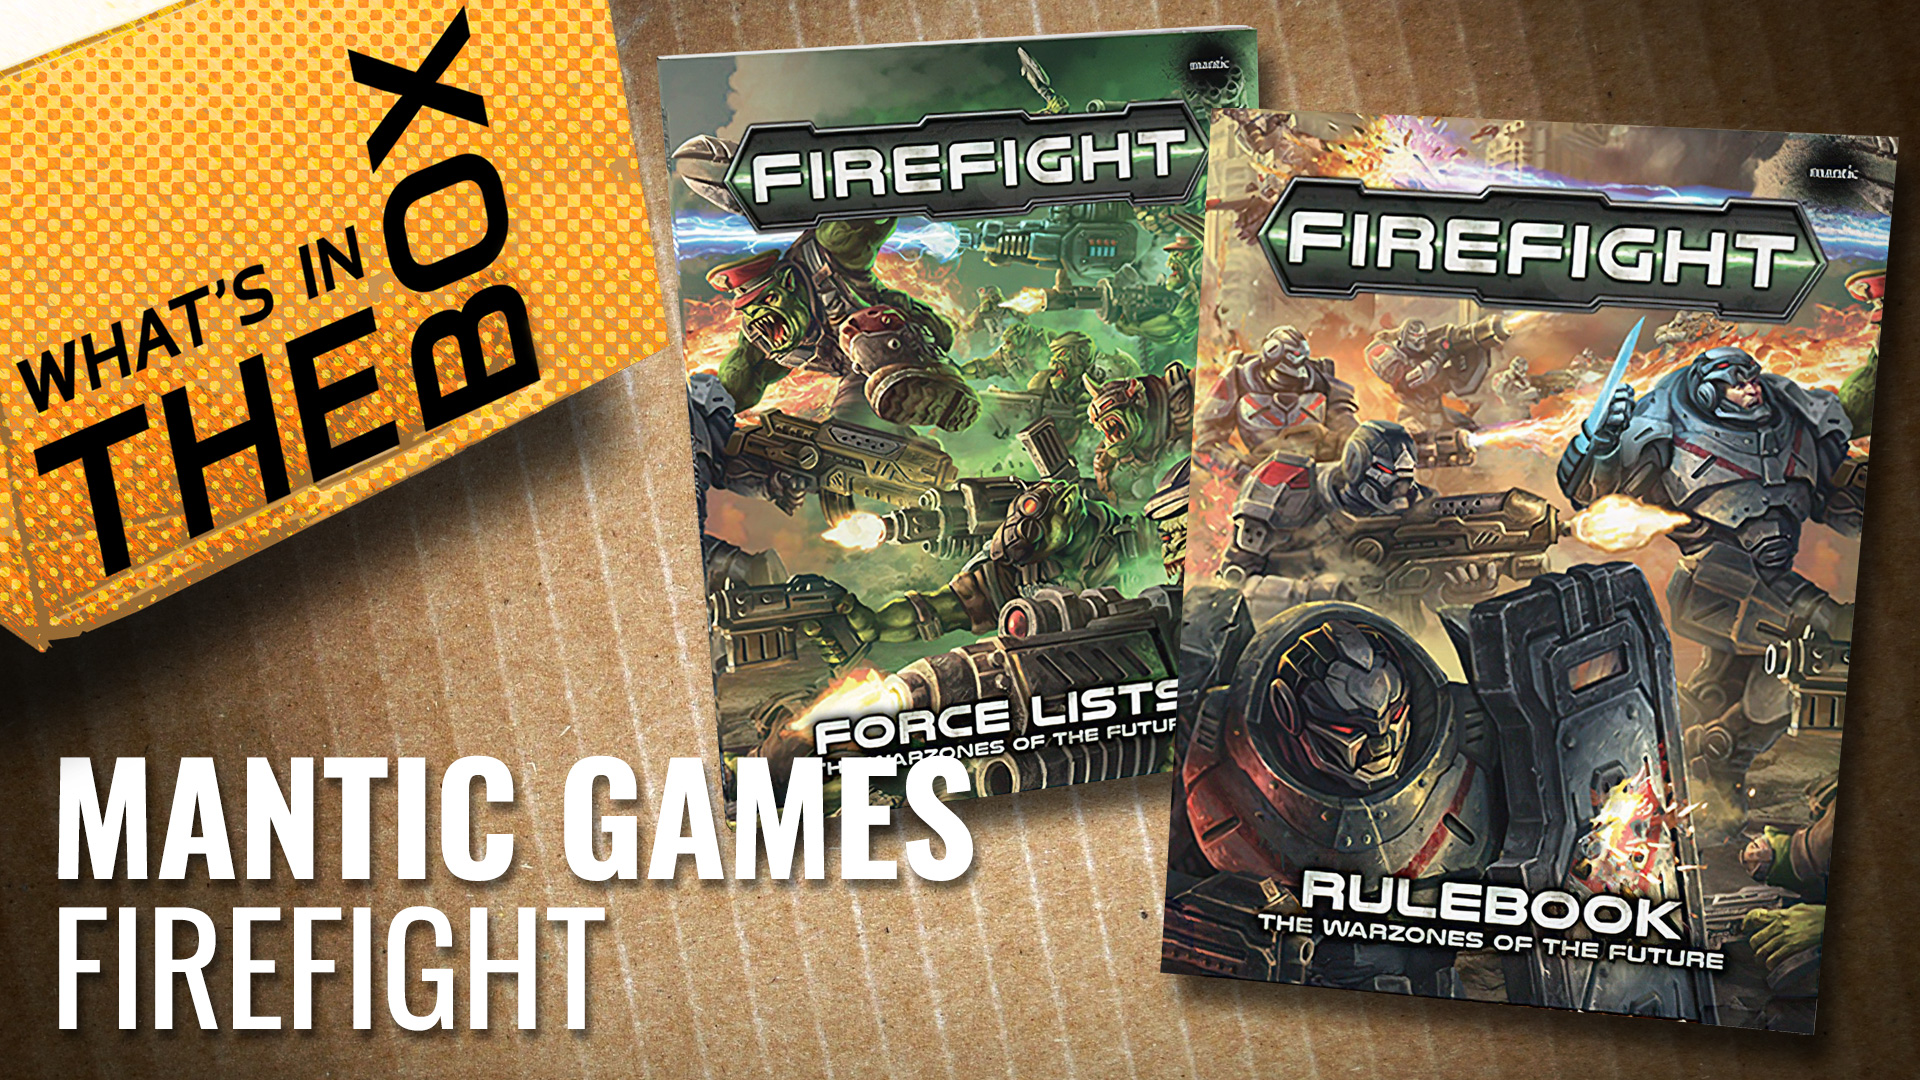 Unboxing---Mantic-Games-Firefight-coverimage